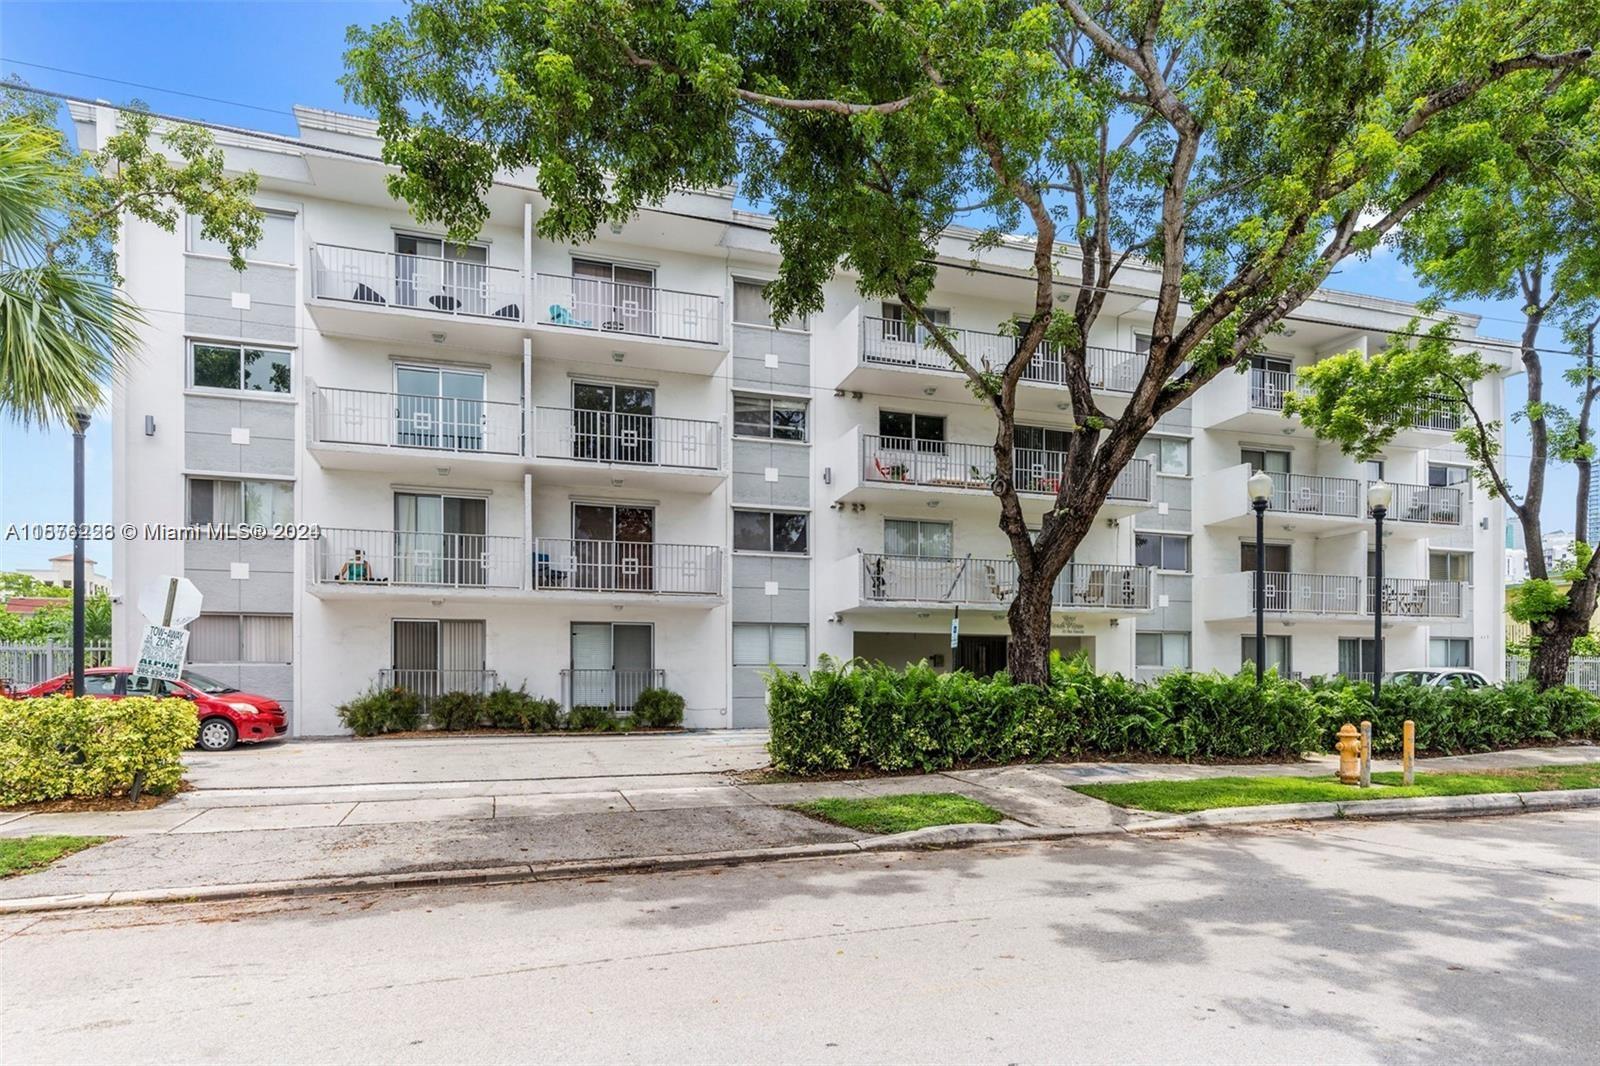 Spacious 1BD/1BA unit. Hardwood floors, walk-in closet, updated granite counters.  Pets allowed. Fantastic location right across the street from Triangle Park, and walking distance to metro mover and Brickell City Center. Cozy building, great neighbors, quiet park green view, secured entry and parking.